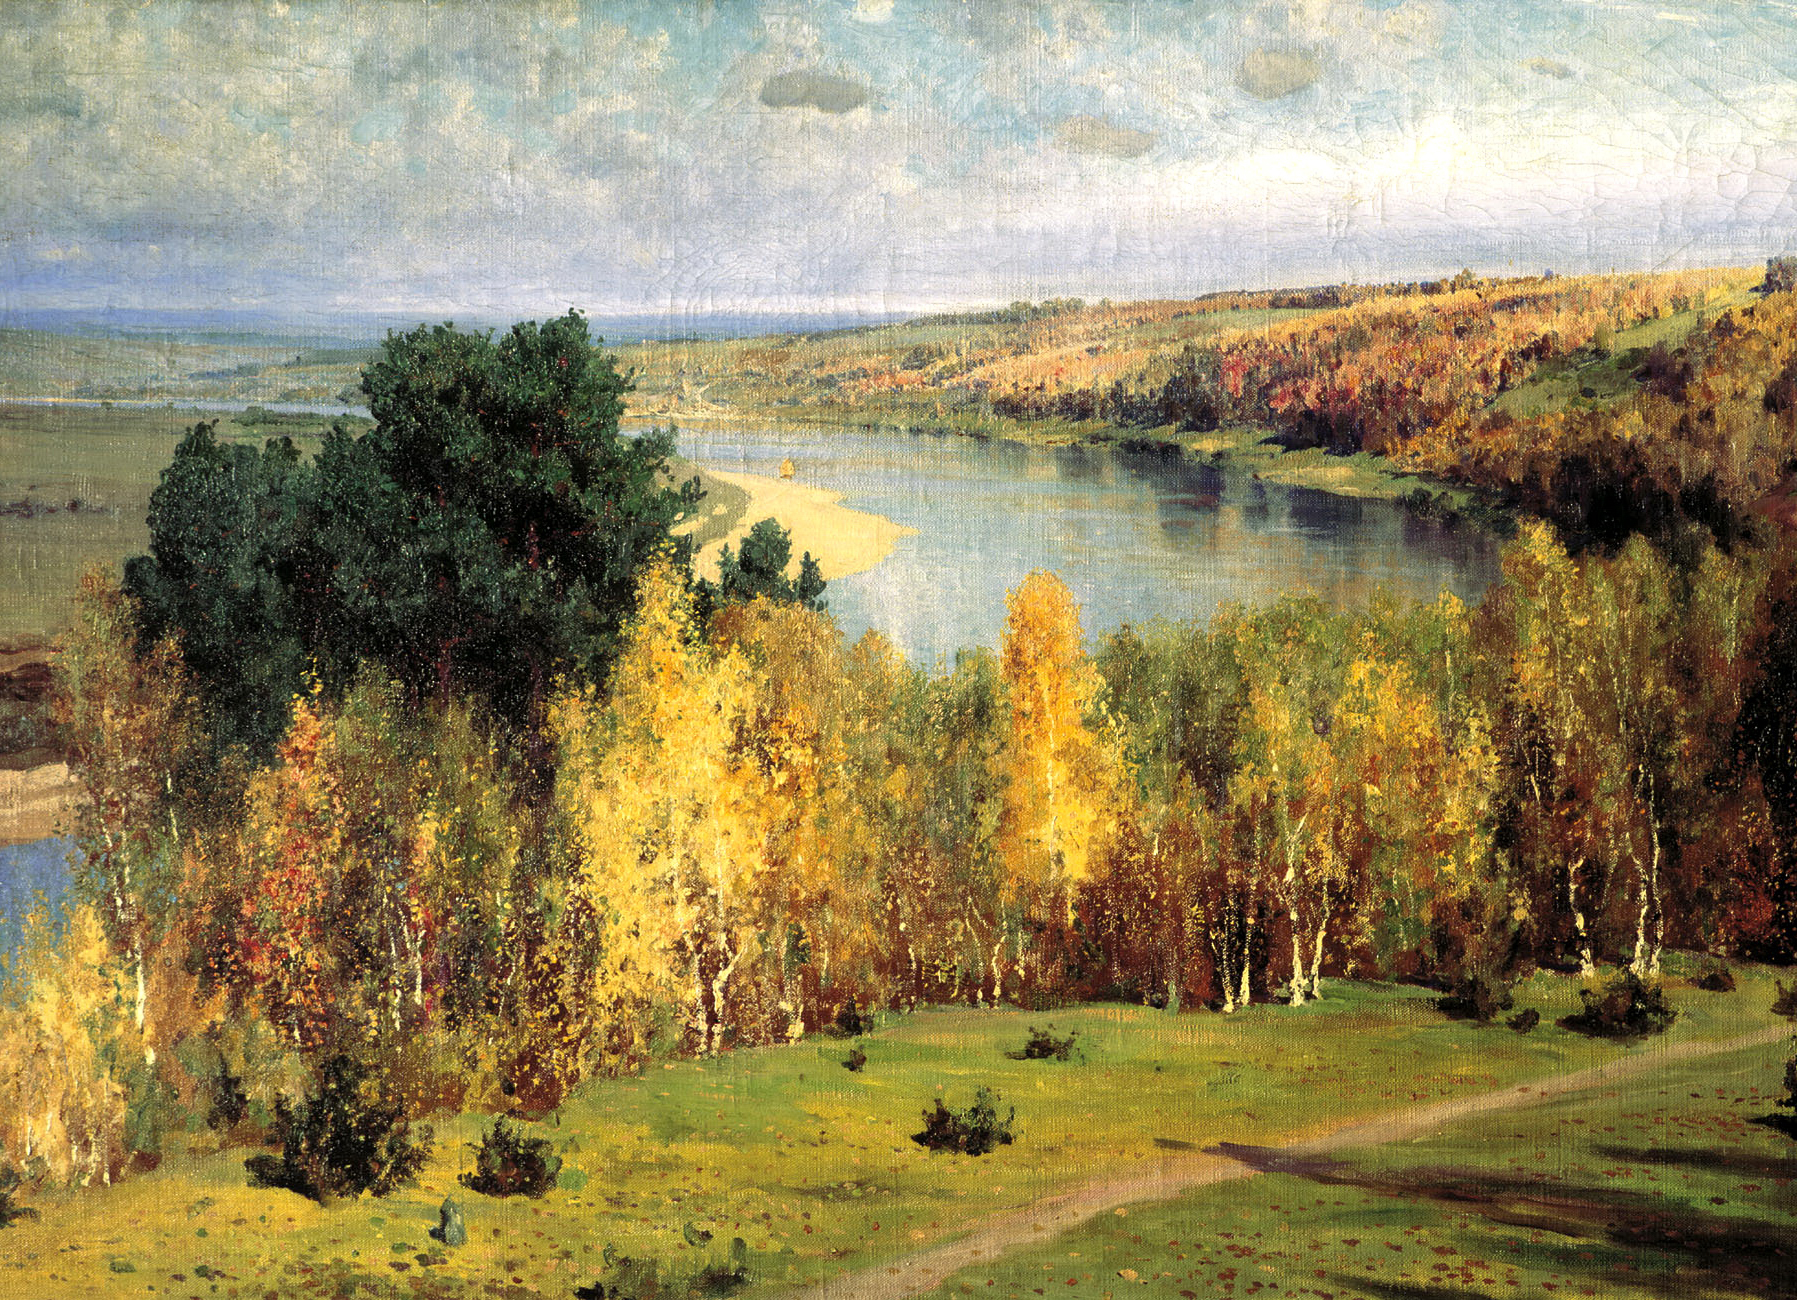 Many of the paintings by Polenov depict intimate places where he lived for a long time, including the banks of the Oka river. His painting «Golden Autumn» is no exception, and ranks as one of the artist's most important works. // Vasily Polenov, «Golden Autumn», 1893